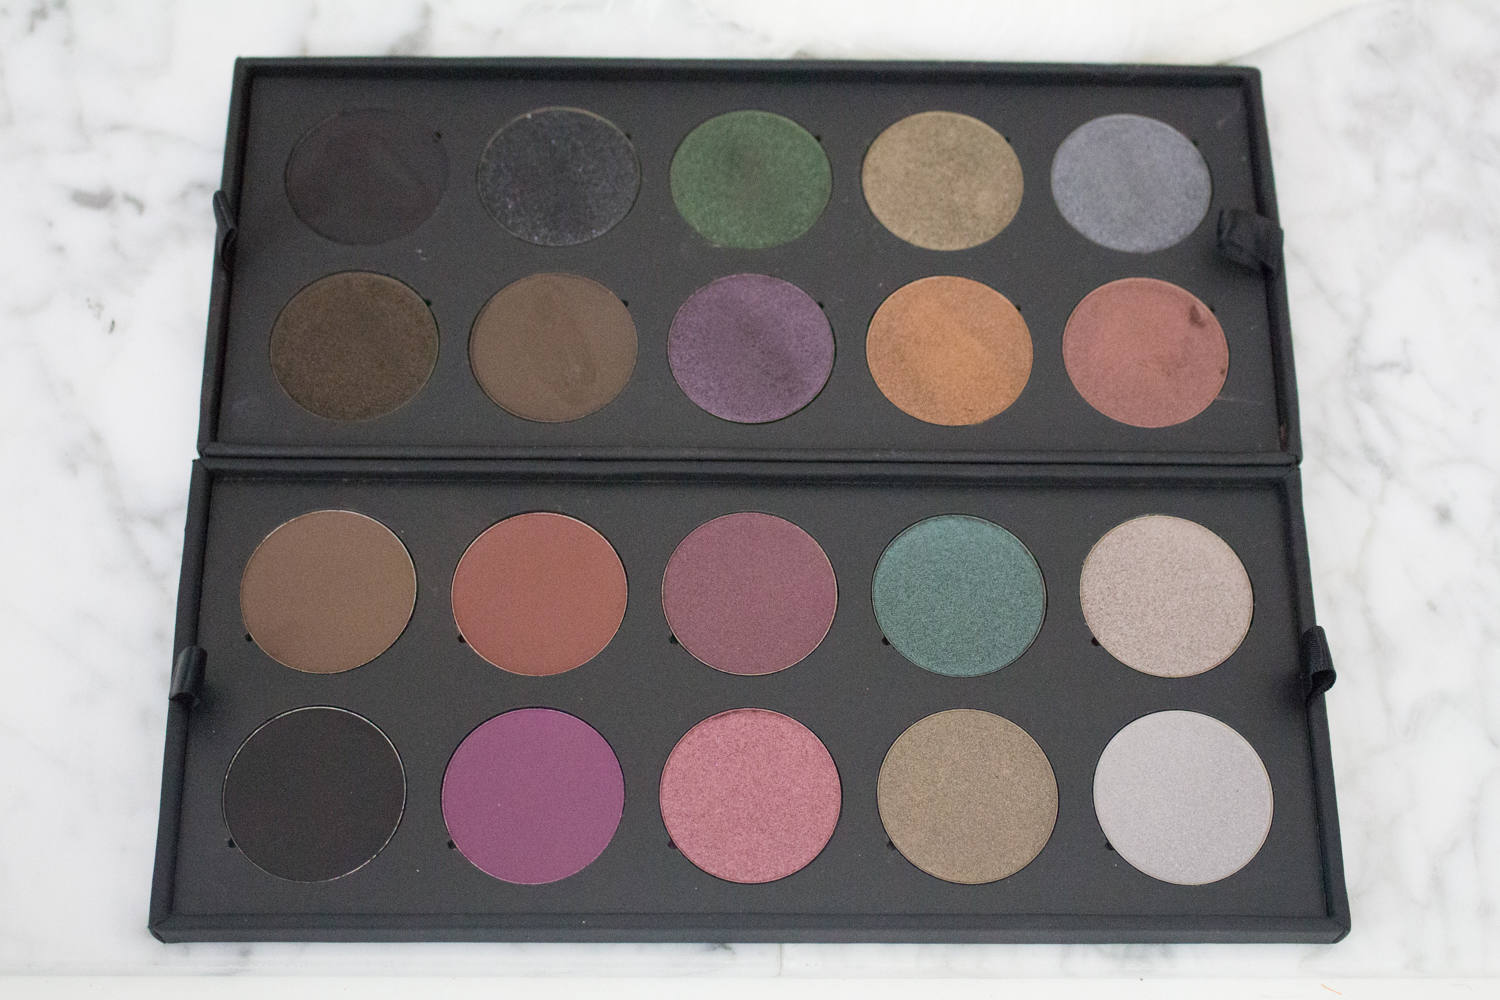 Comparison of the Make Up For Ever 30th Anniversary Smokey Rows to that of the Artist Shadows Collector's Palette for Cyber Monday |www.beingmelody.com|